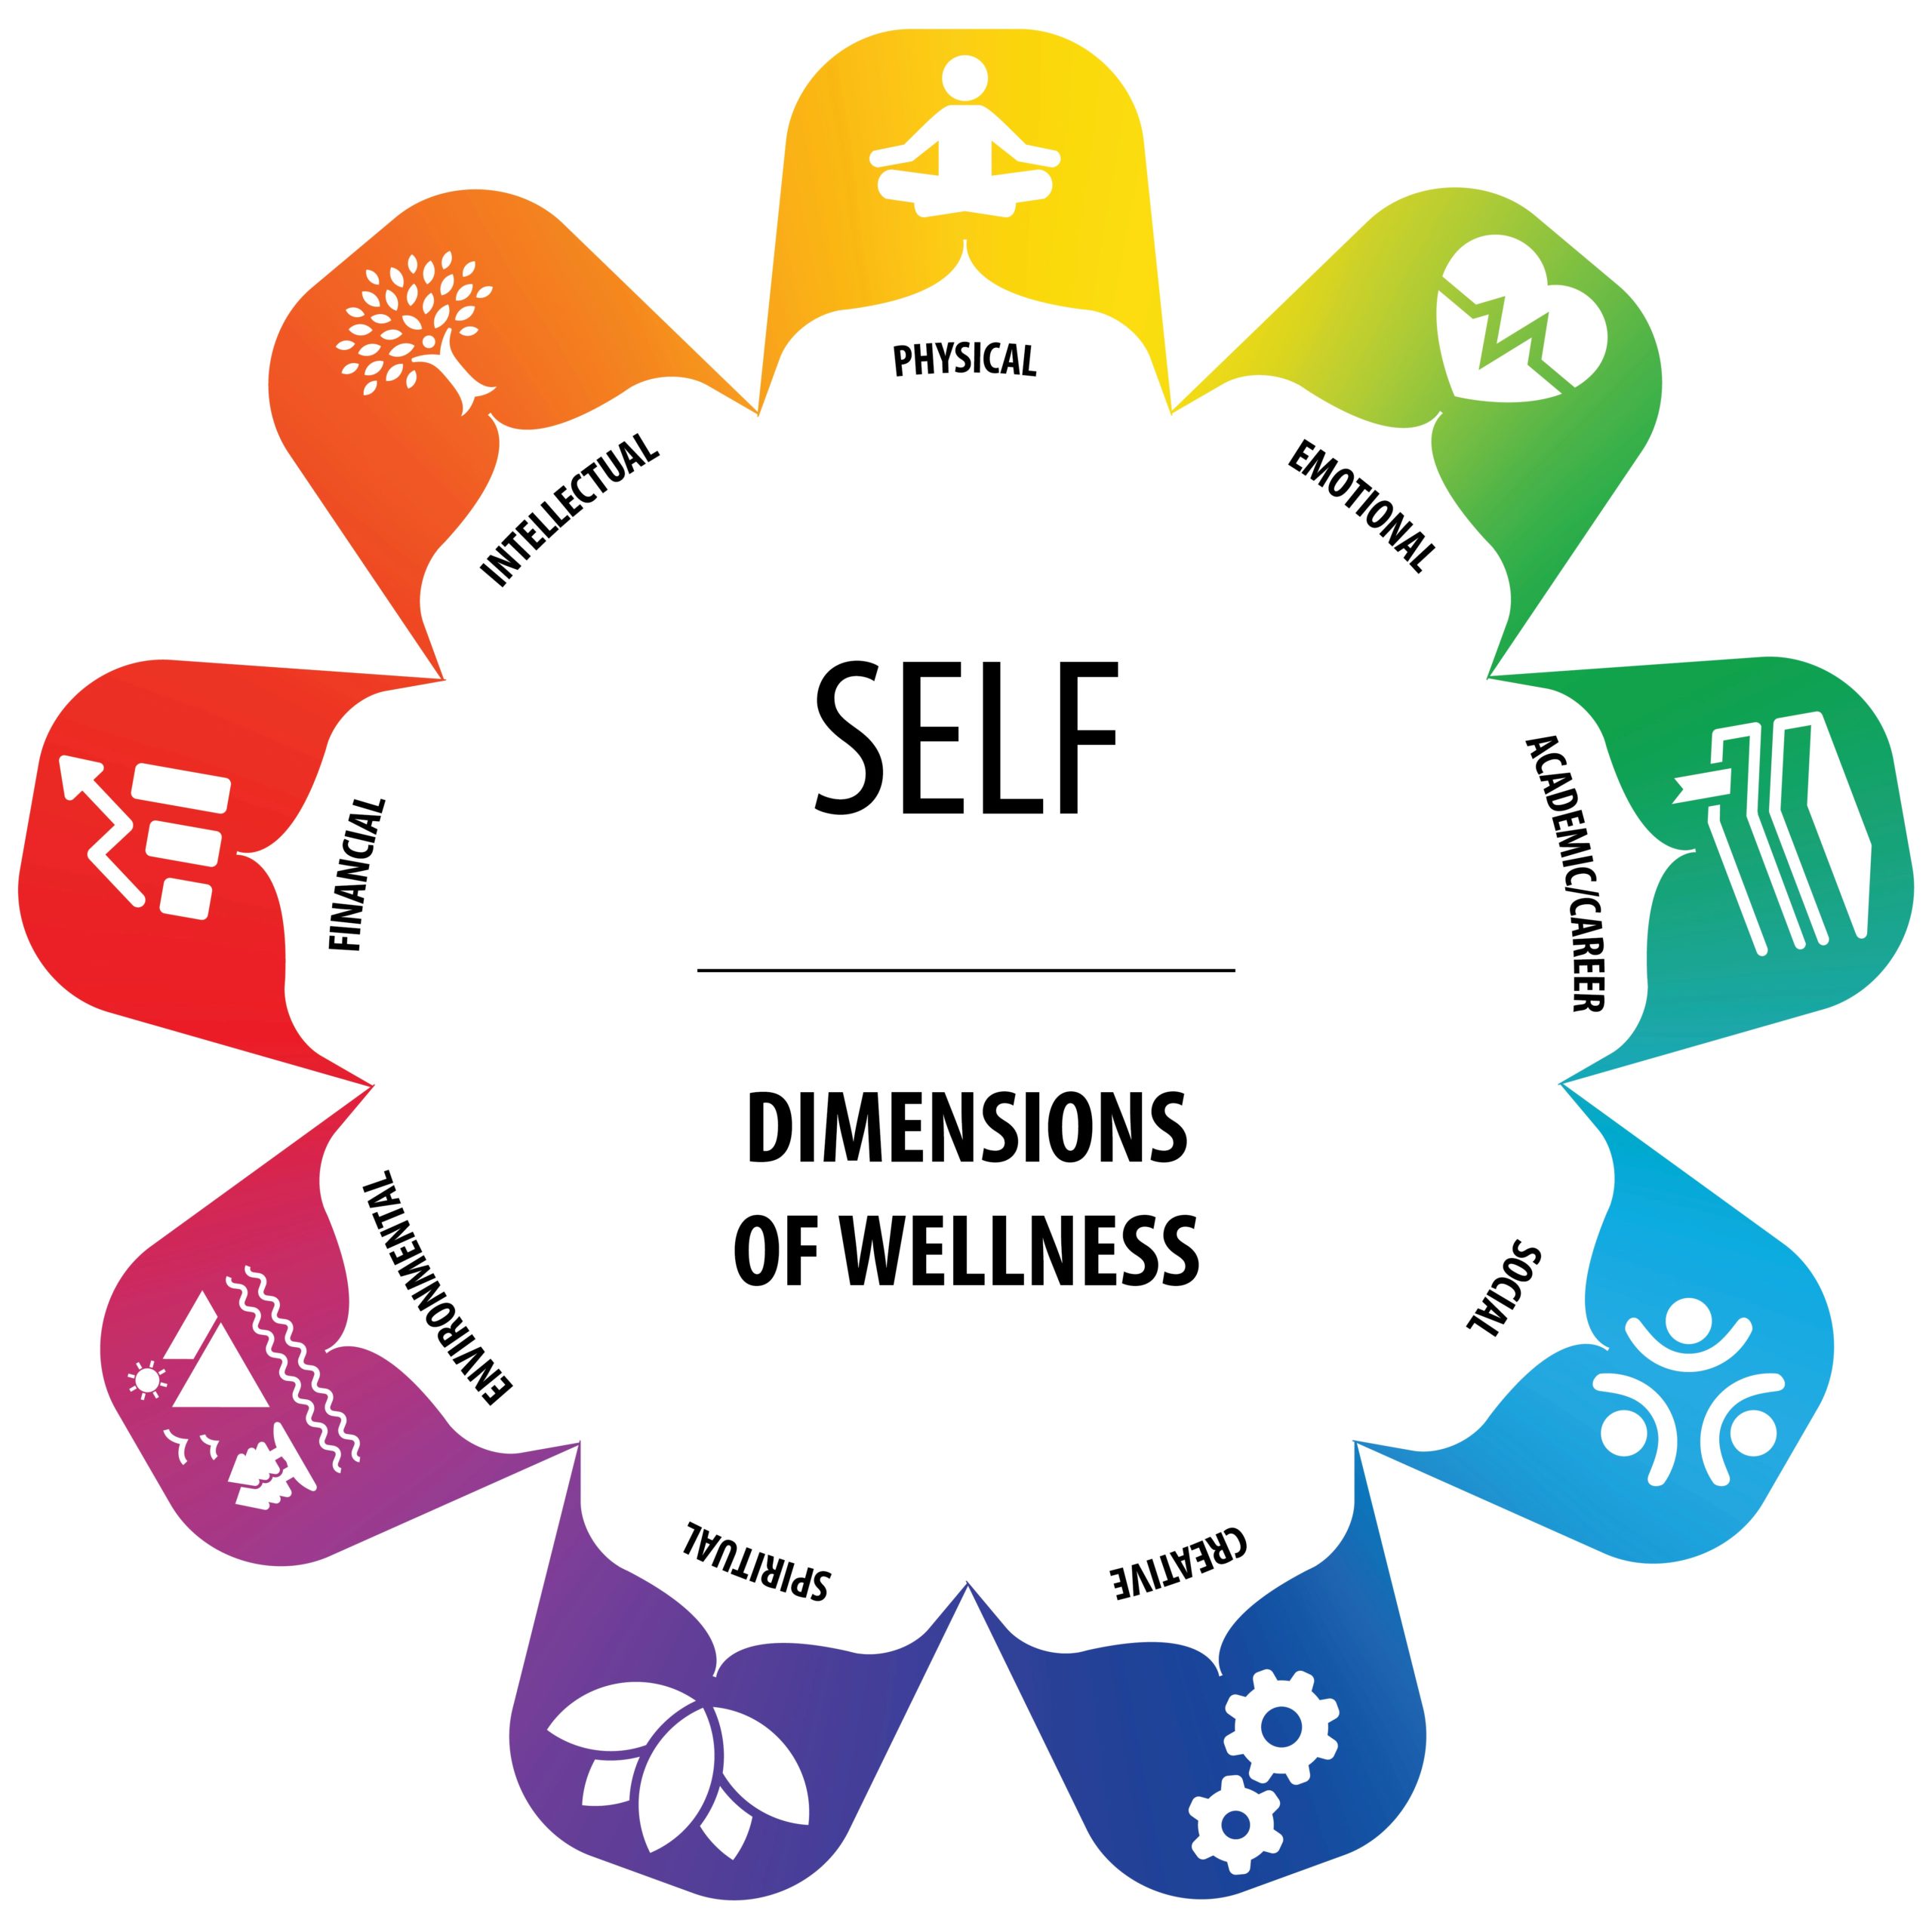 A wheel labelled with the 9 dimensions of self wellness.